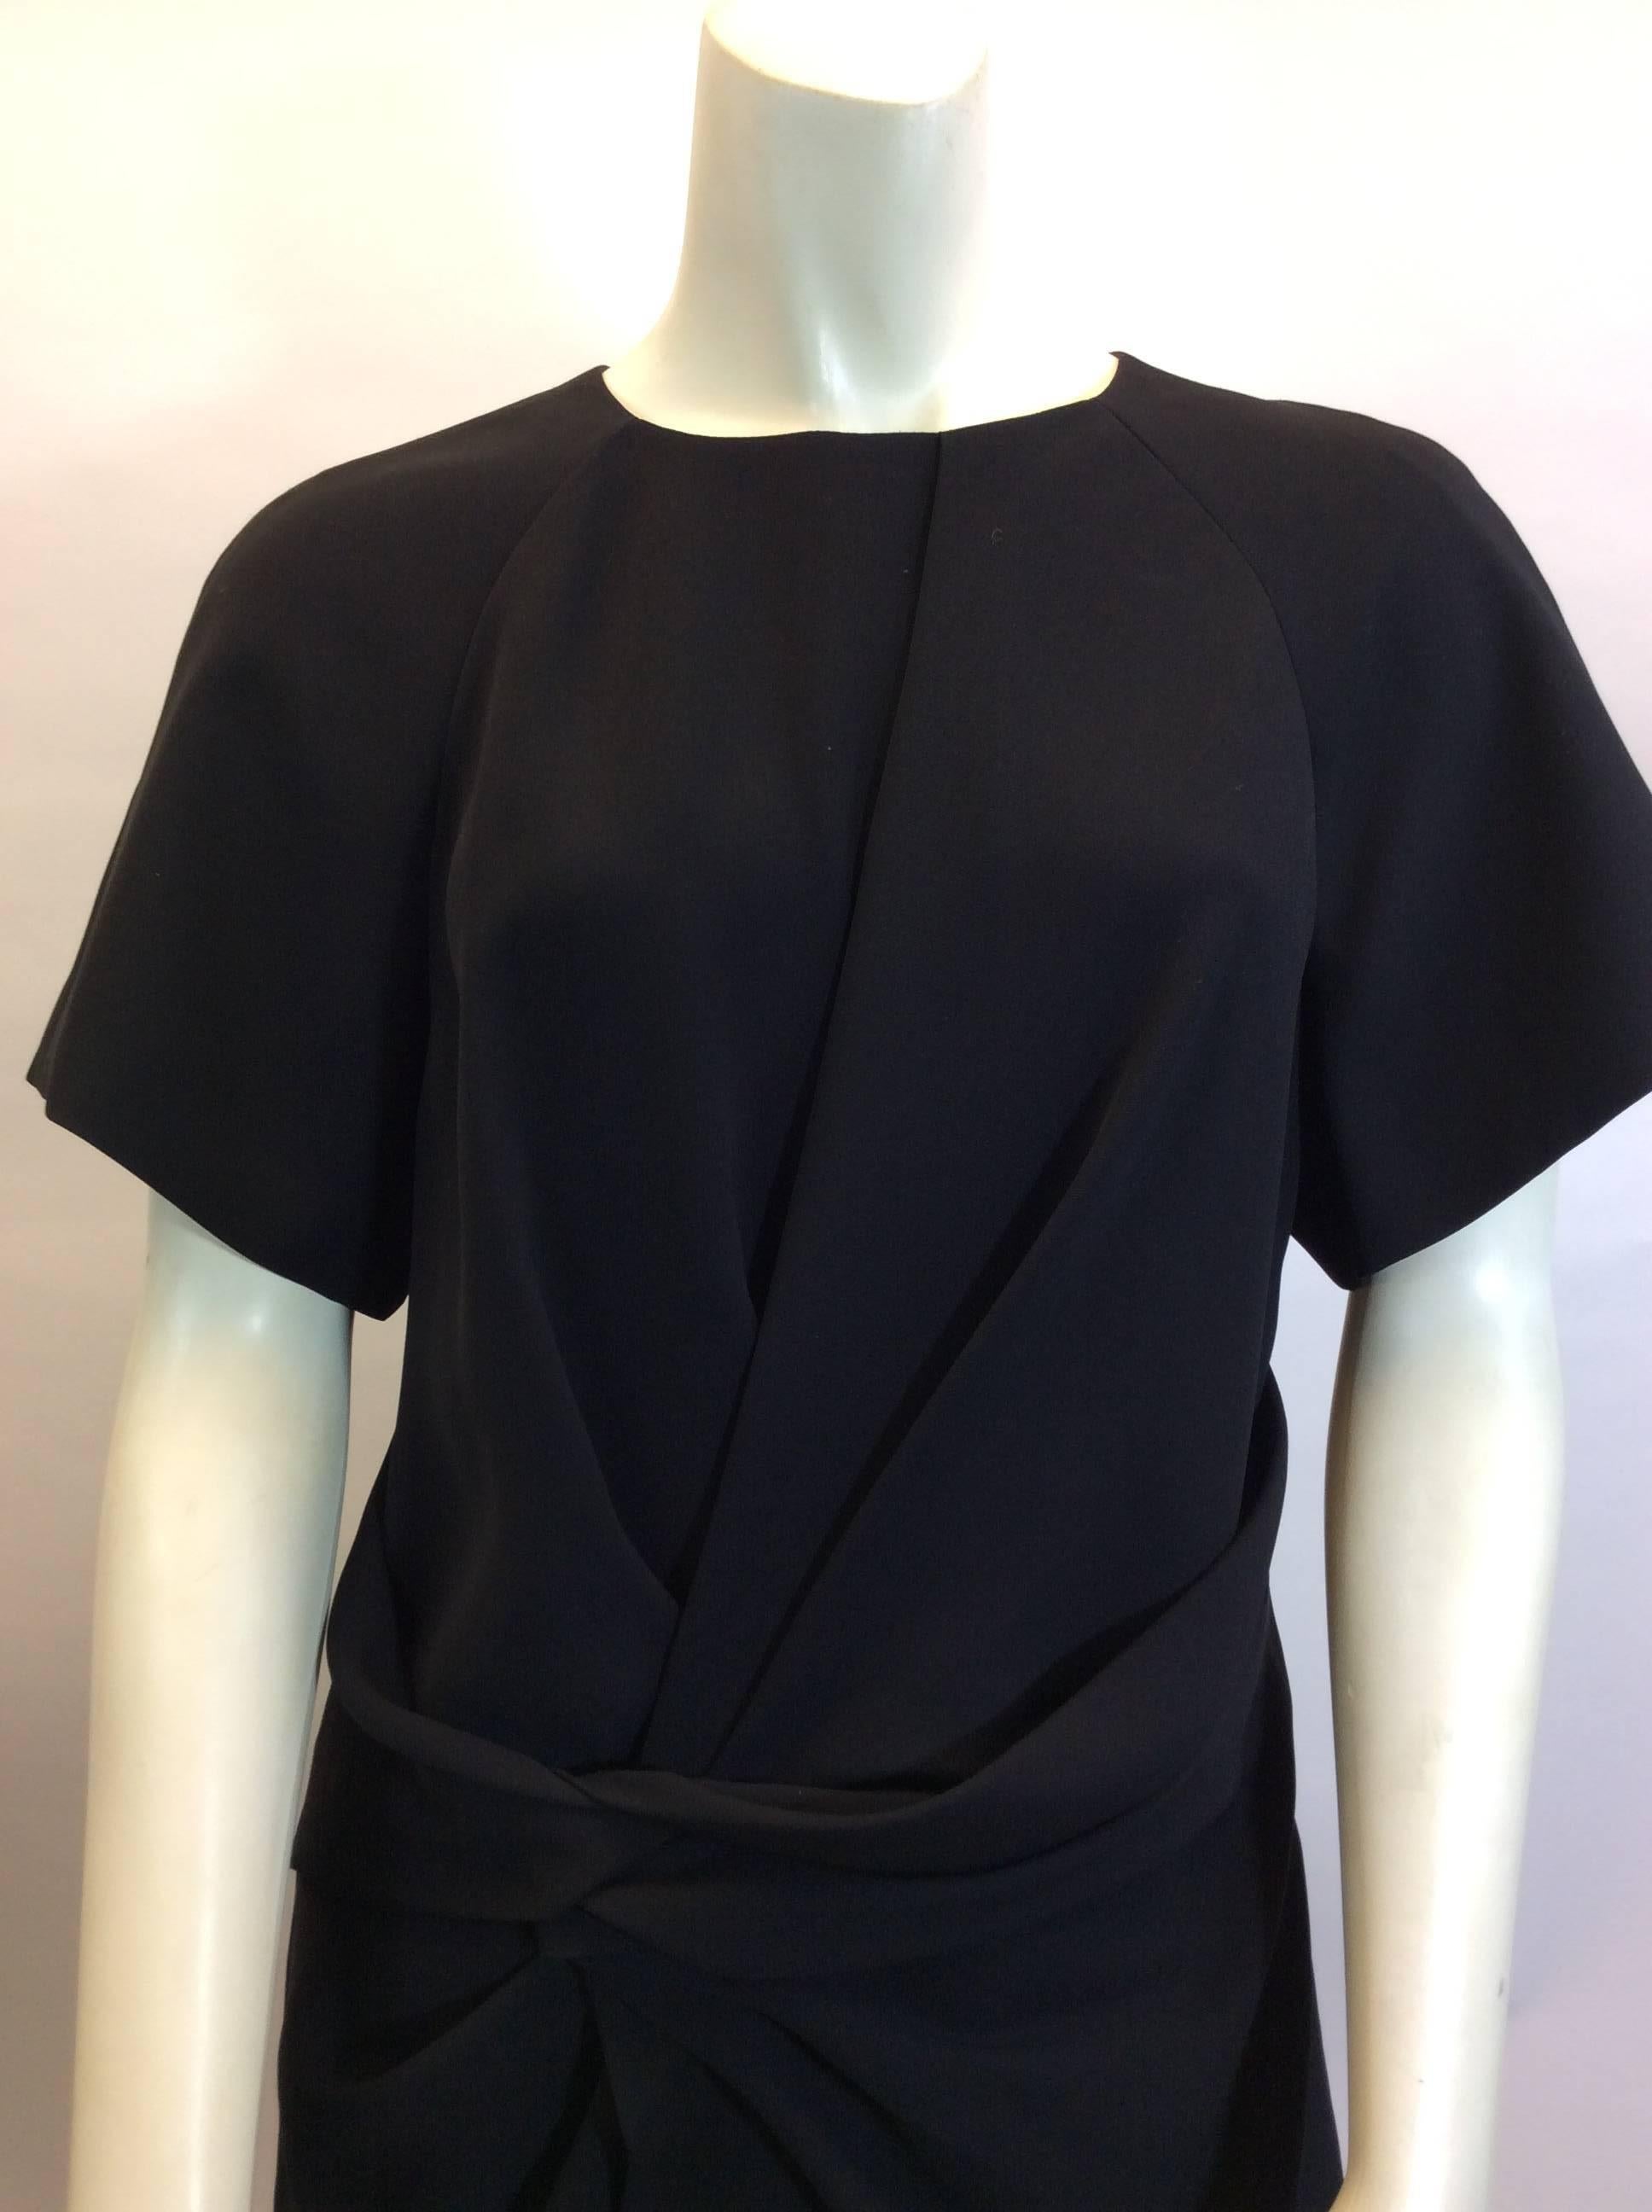 Alexander Wang Black Detailed Waist Blouse
Short sleeves, cinched waist detail
Longer style blouse
Exterior is polyester, lining is also polyester
Made in China
Size 10
